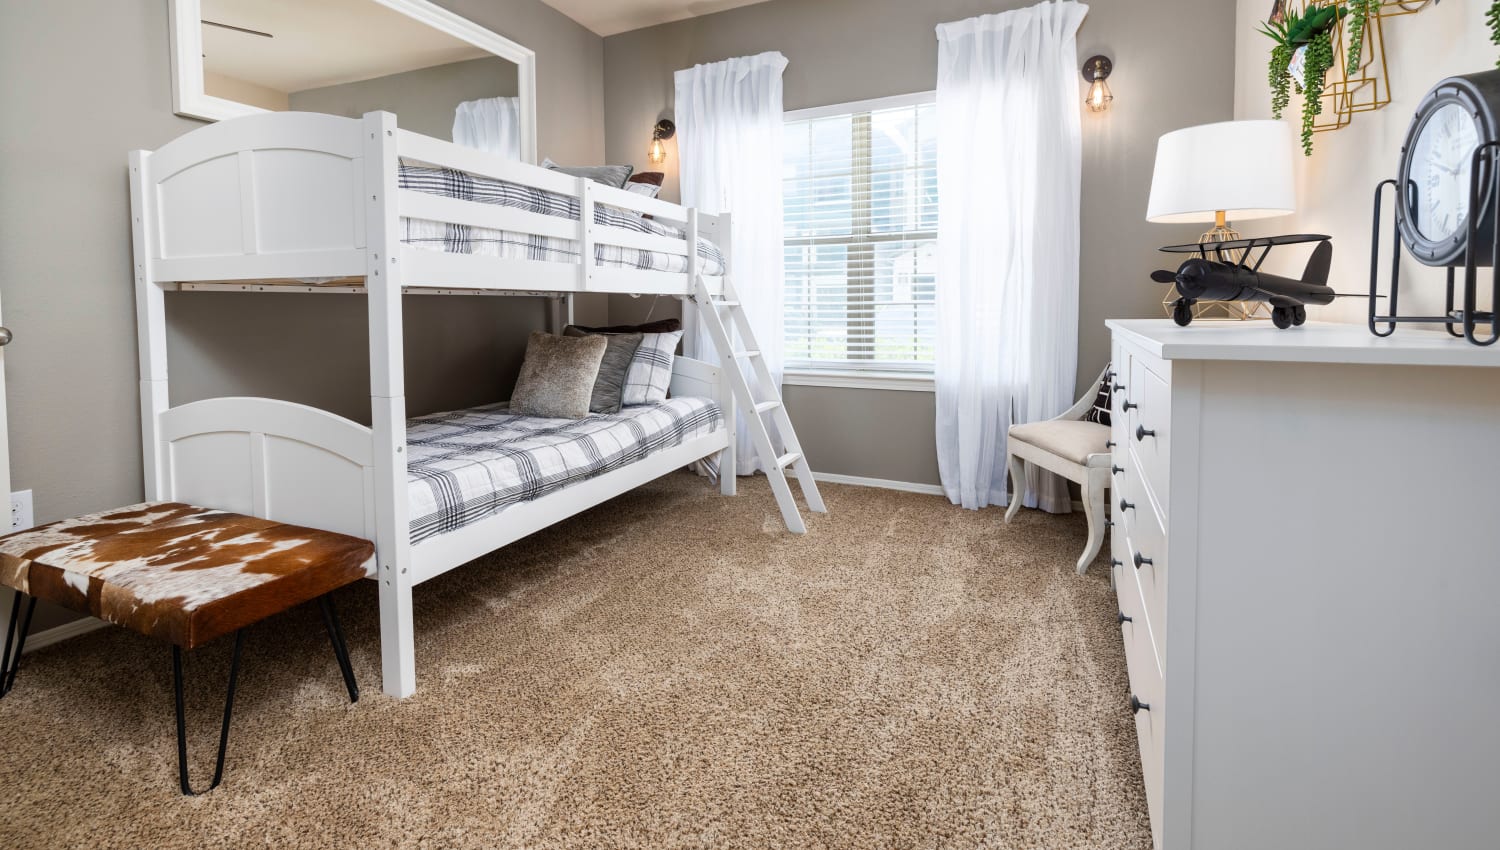 Double deck bedroom for kids at Carrington Oaks in Buda, Texas